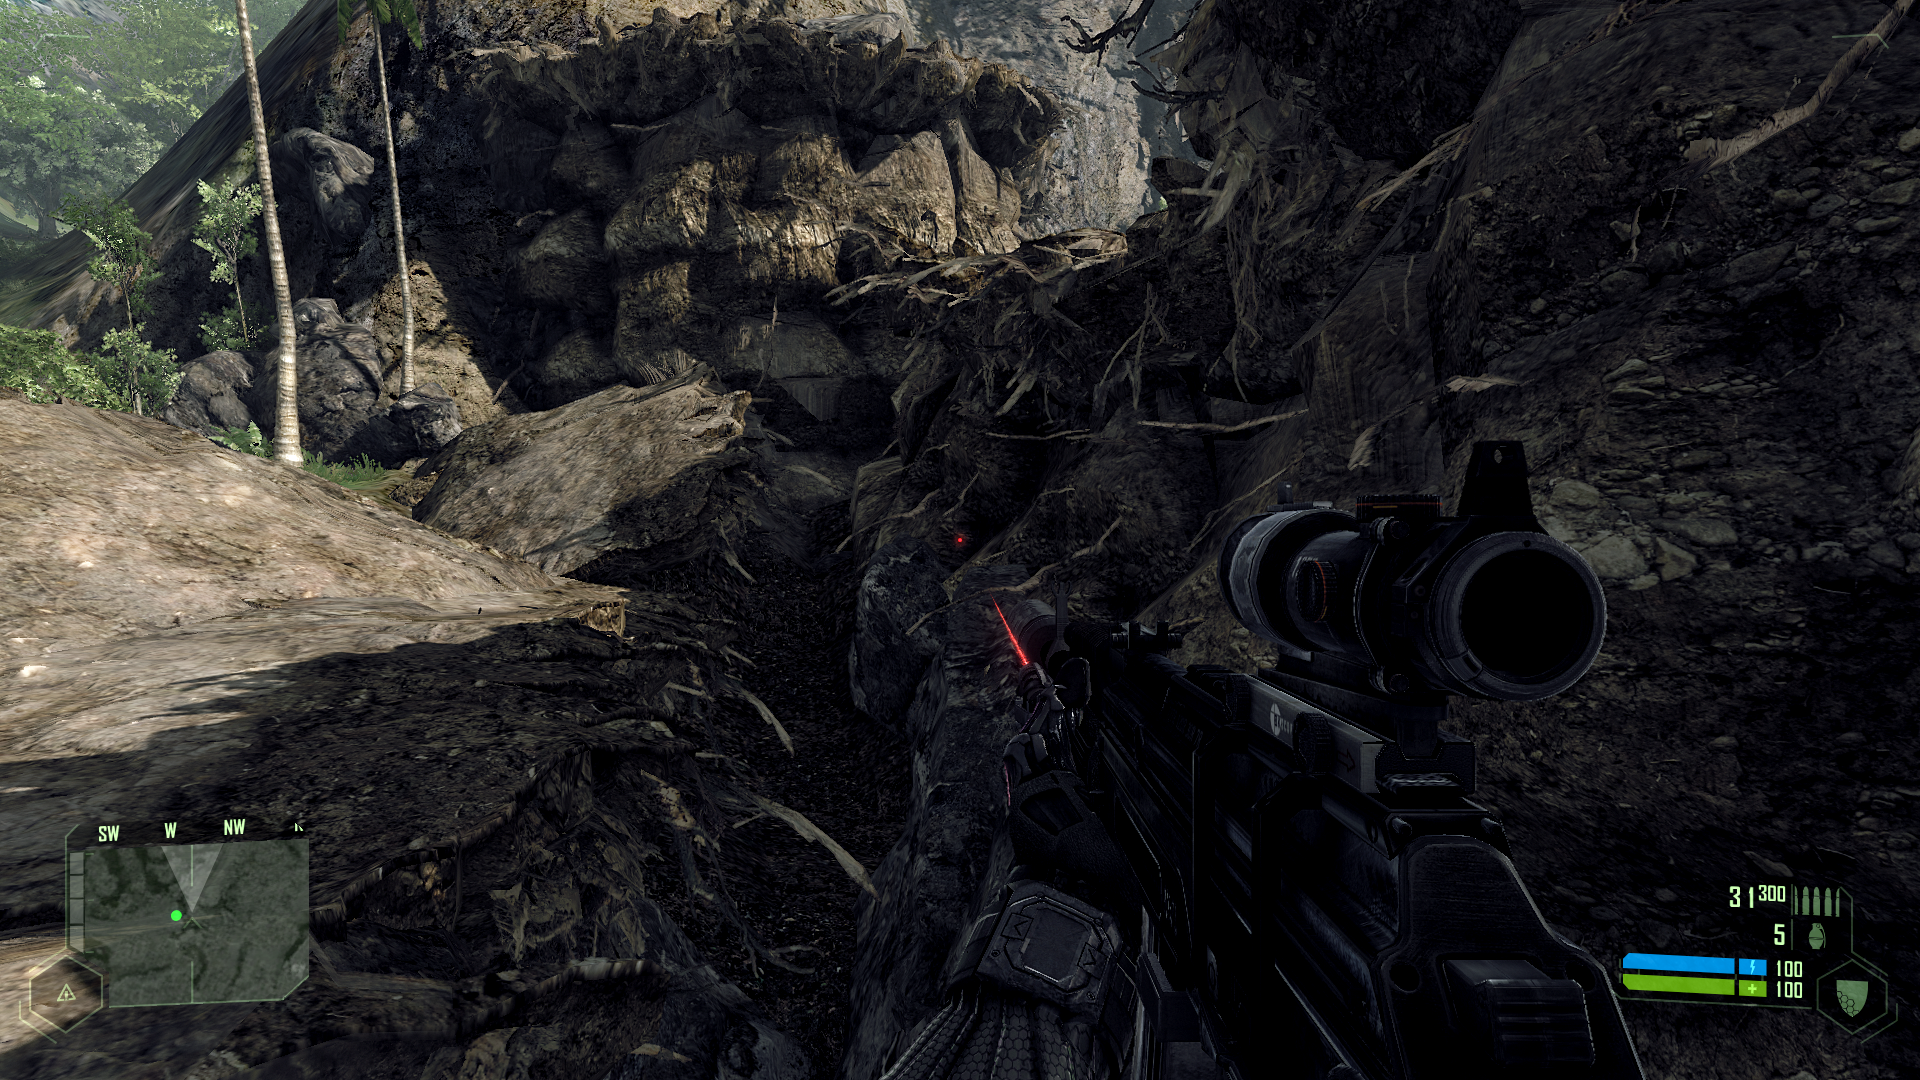 crysis2010-12-3122-33-8sw8.png